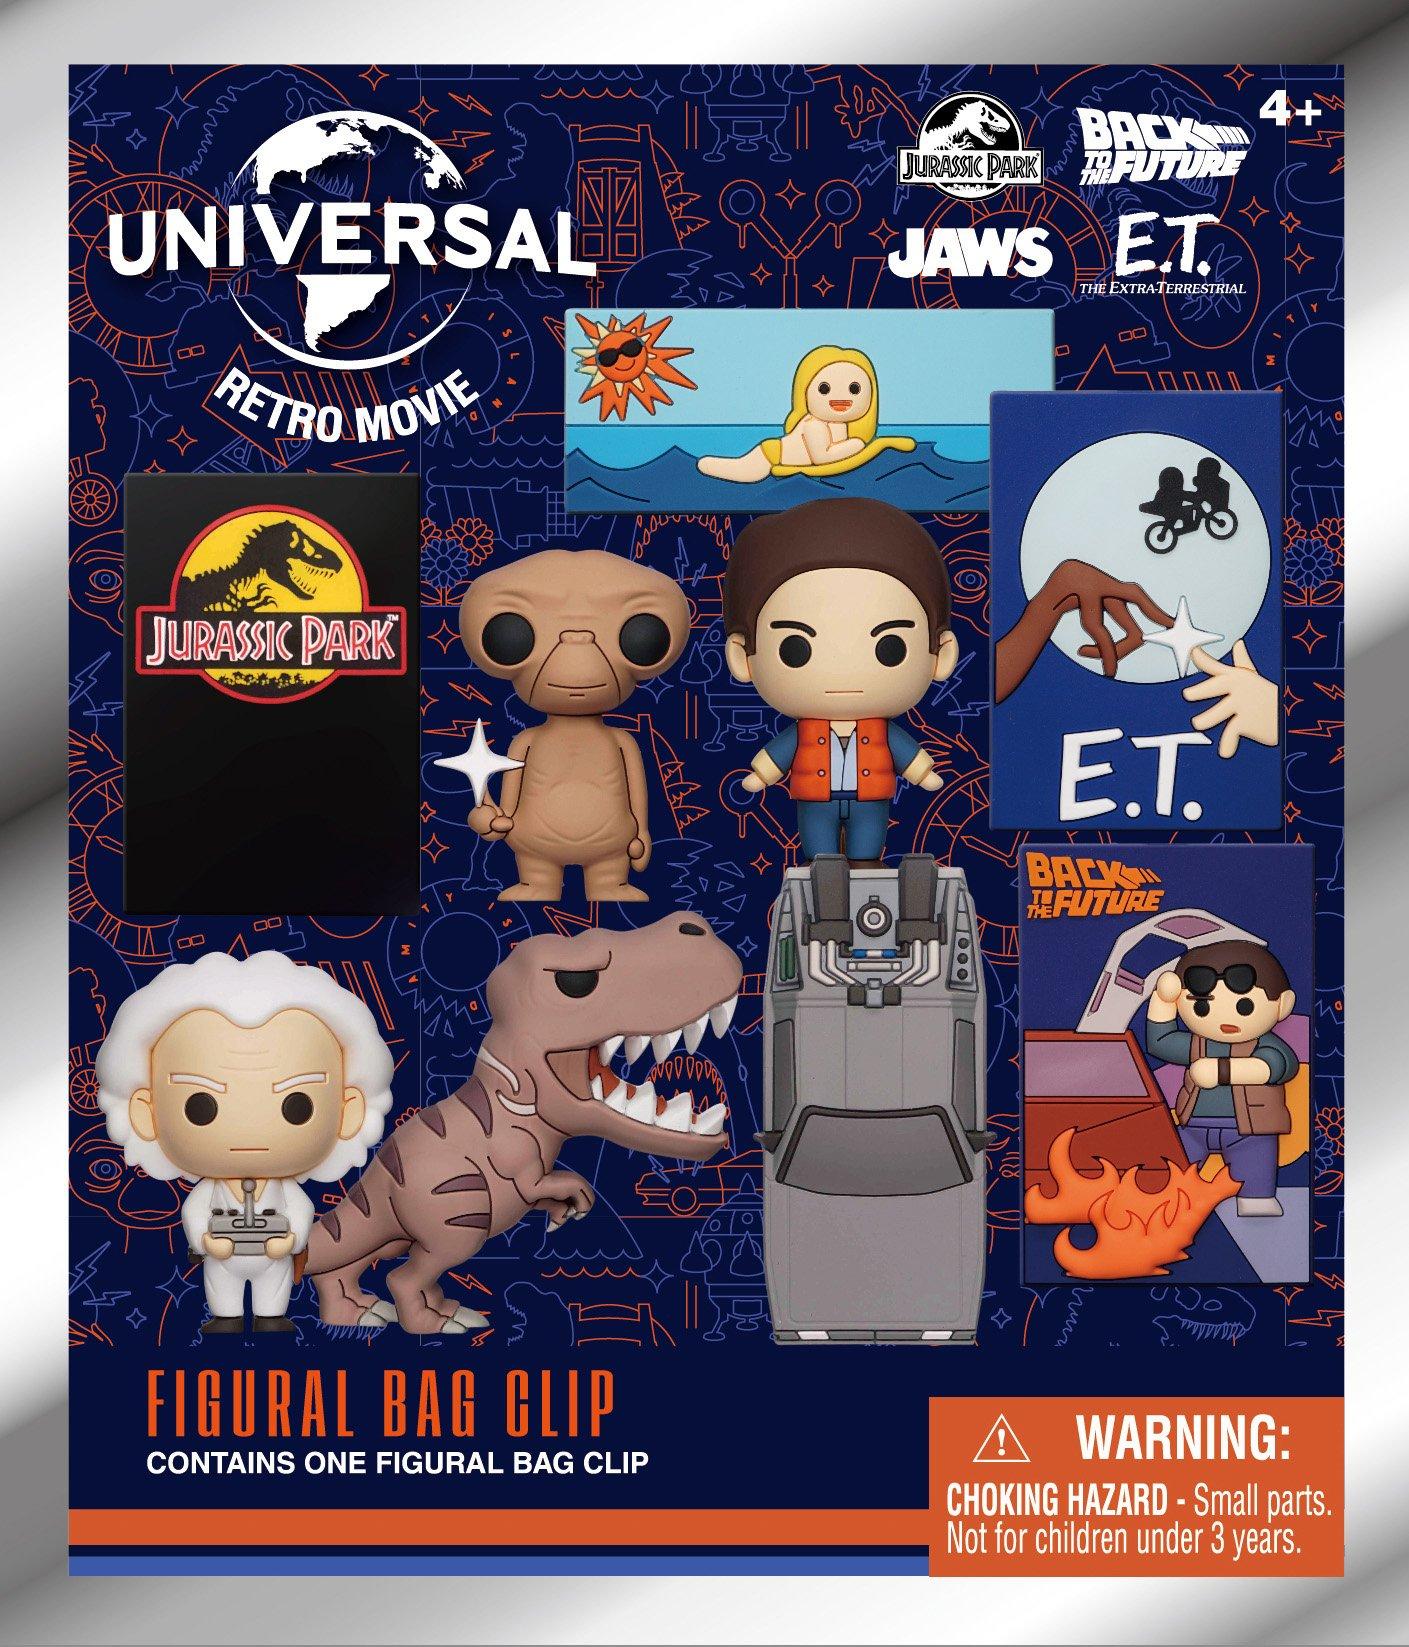 Universal Retro Movies E.T. the Extra-Terrestrial, Back to the